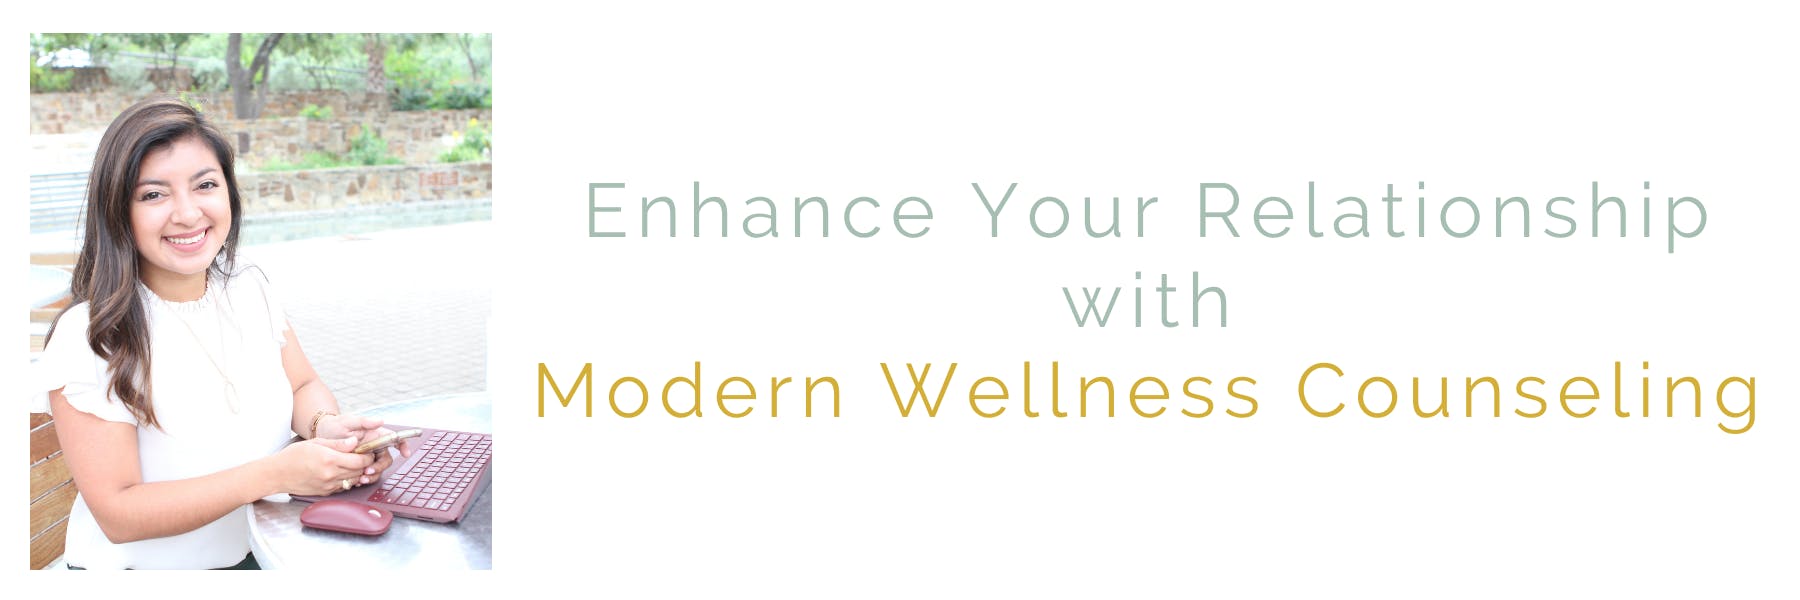 Enhance Your Relationship with Modern Wellness Counseling. Online, convenient, counseling from the comfort of your own home. San Antonio, Tx. 78249, 78258, 78255,78230. 